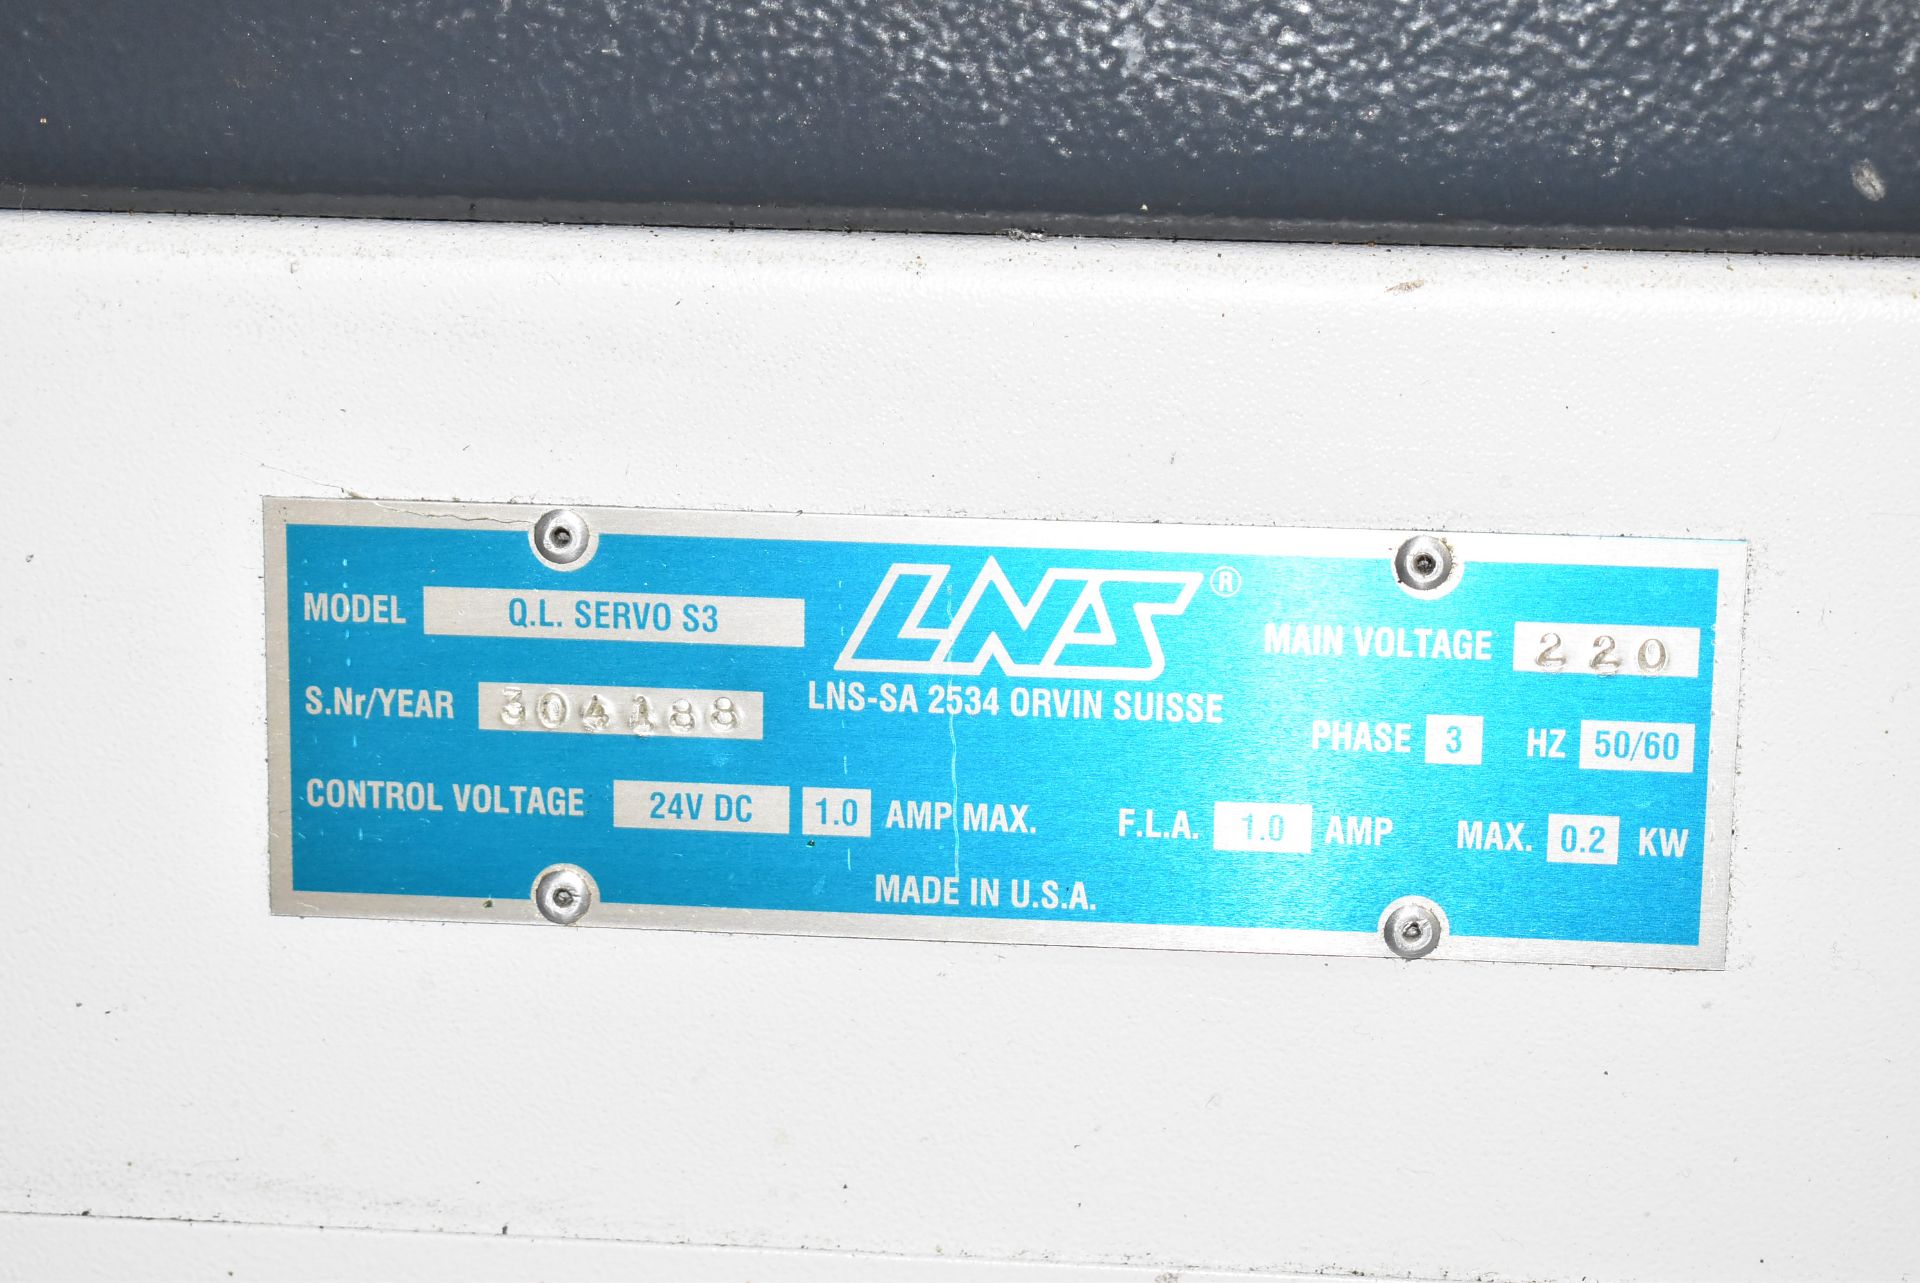 LNS Q.L. SERVO S3 BAR FEEDER, 220V/3PH/50-60HZ, S/N 304188 (CI) - Image 3 of 4